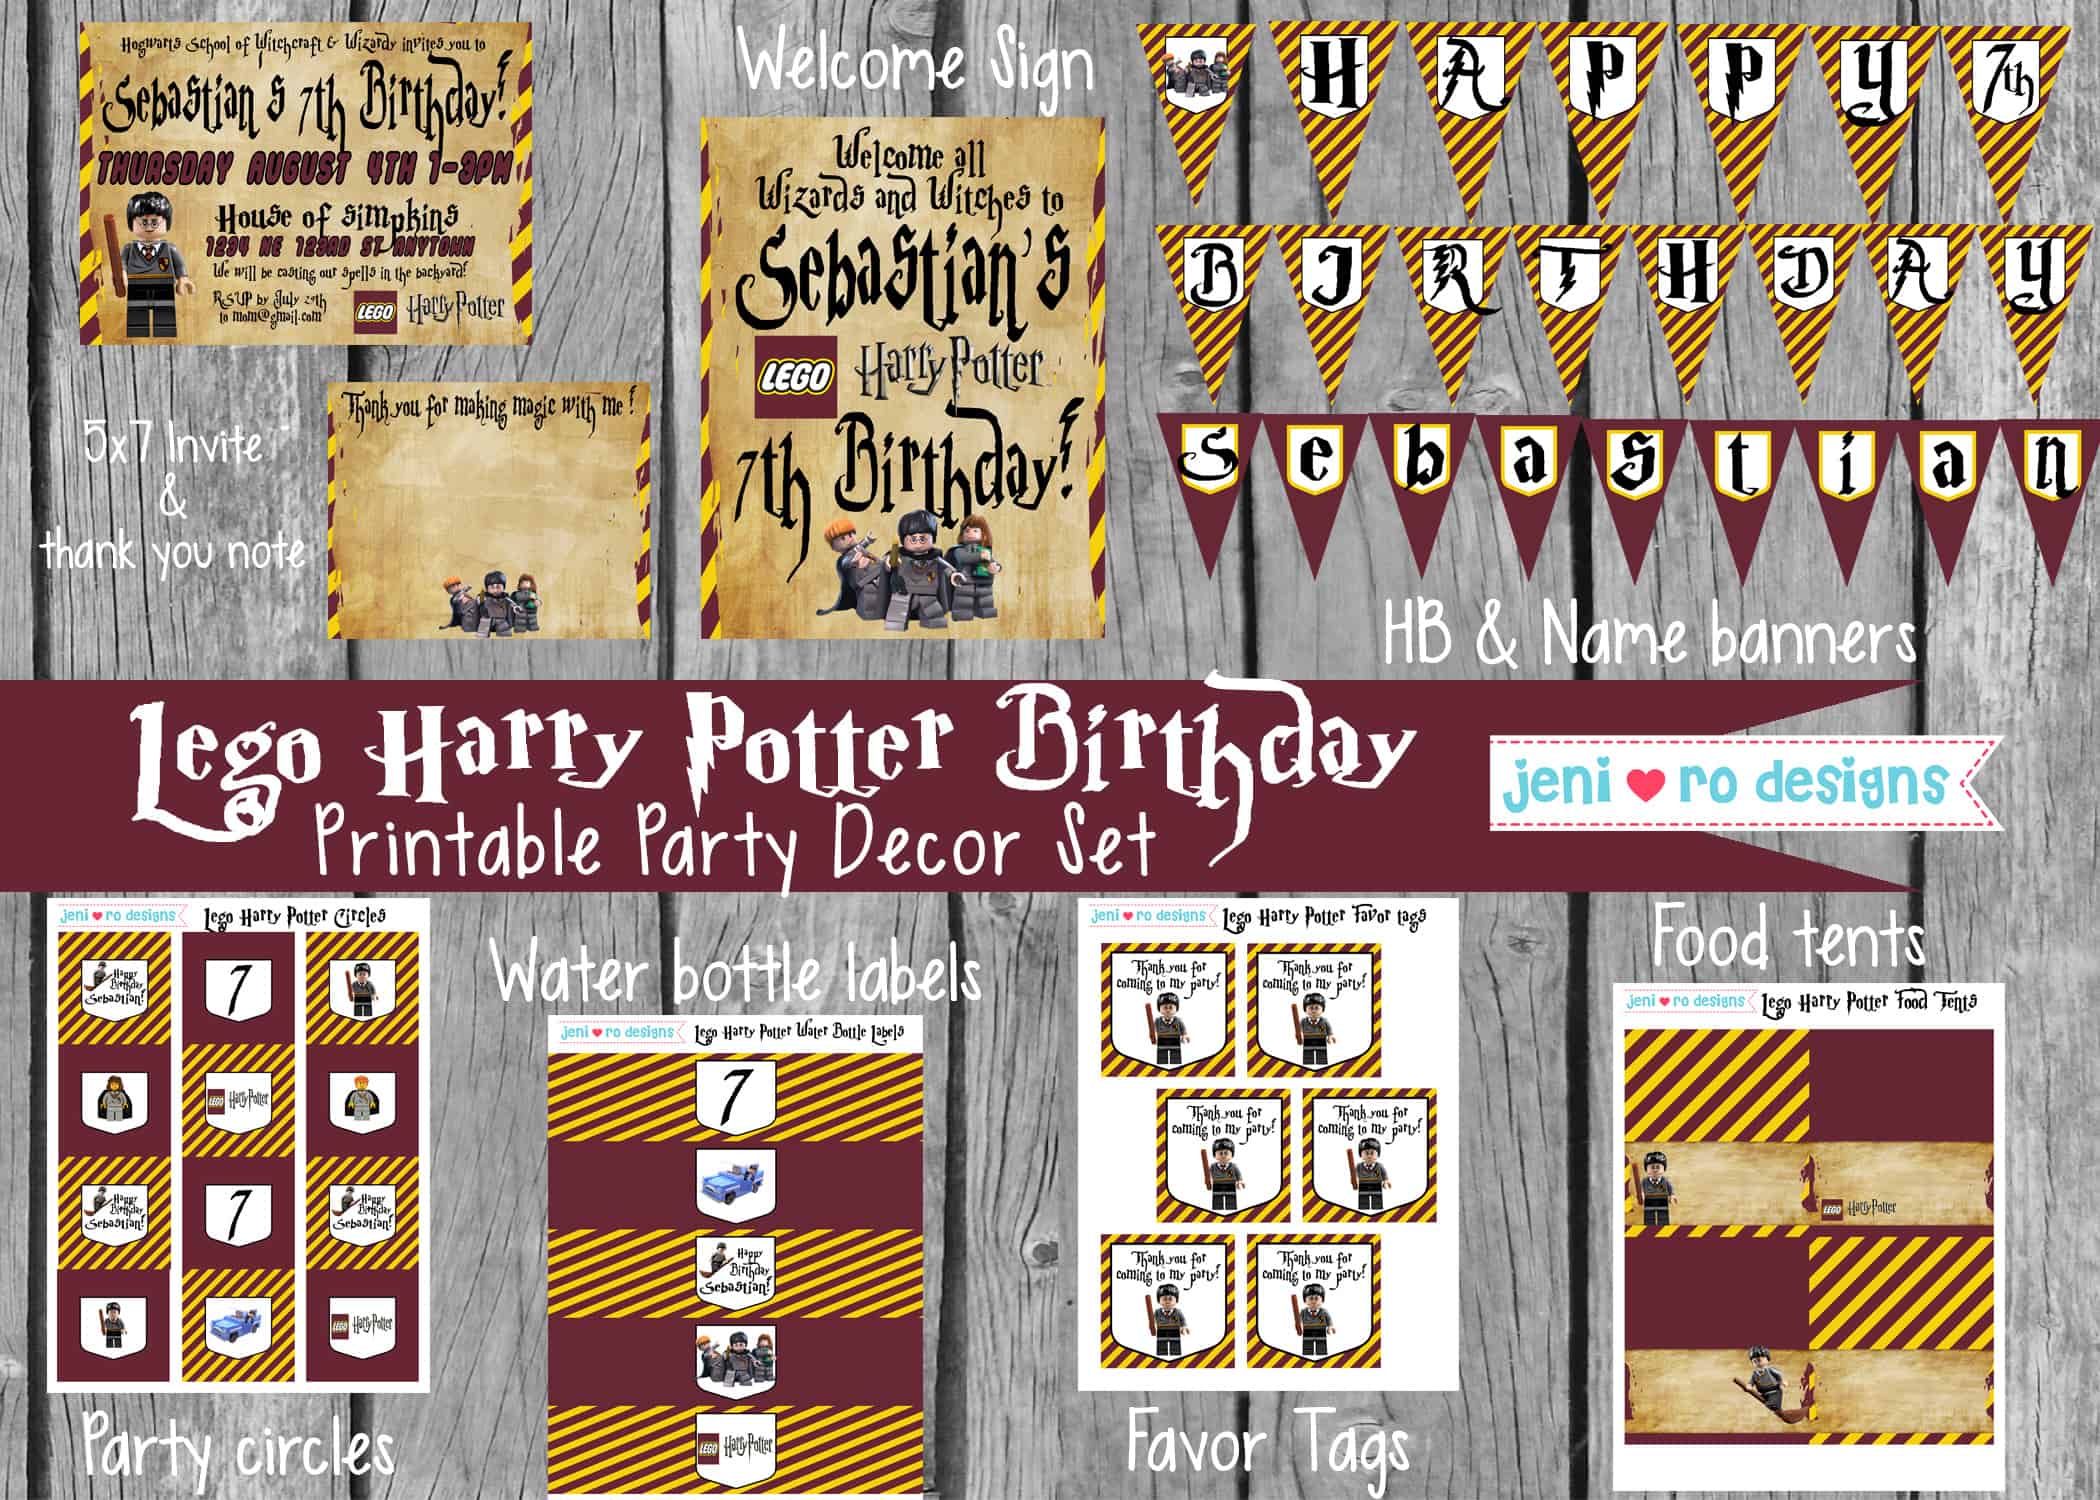 DIY Harry Potter Invitations You Can Print From Home  Harry potter  invitations, Harry potter party invitations, Harry potter birthday  invitations